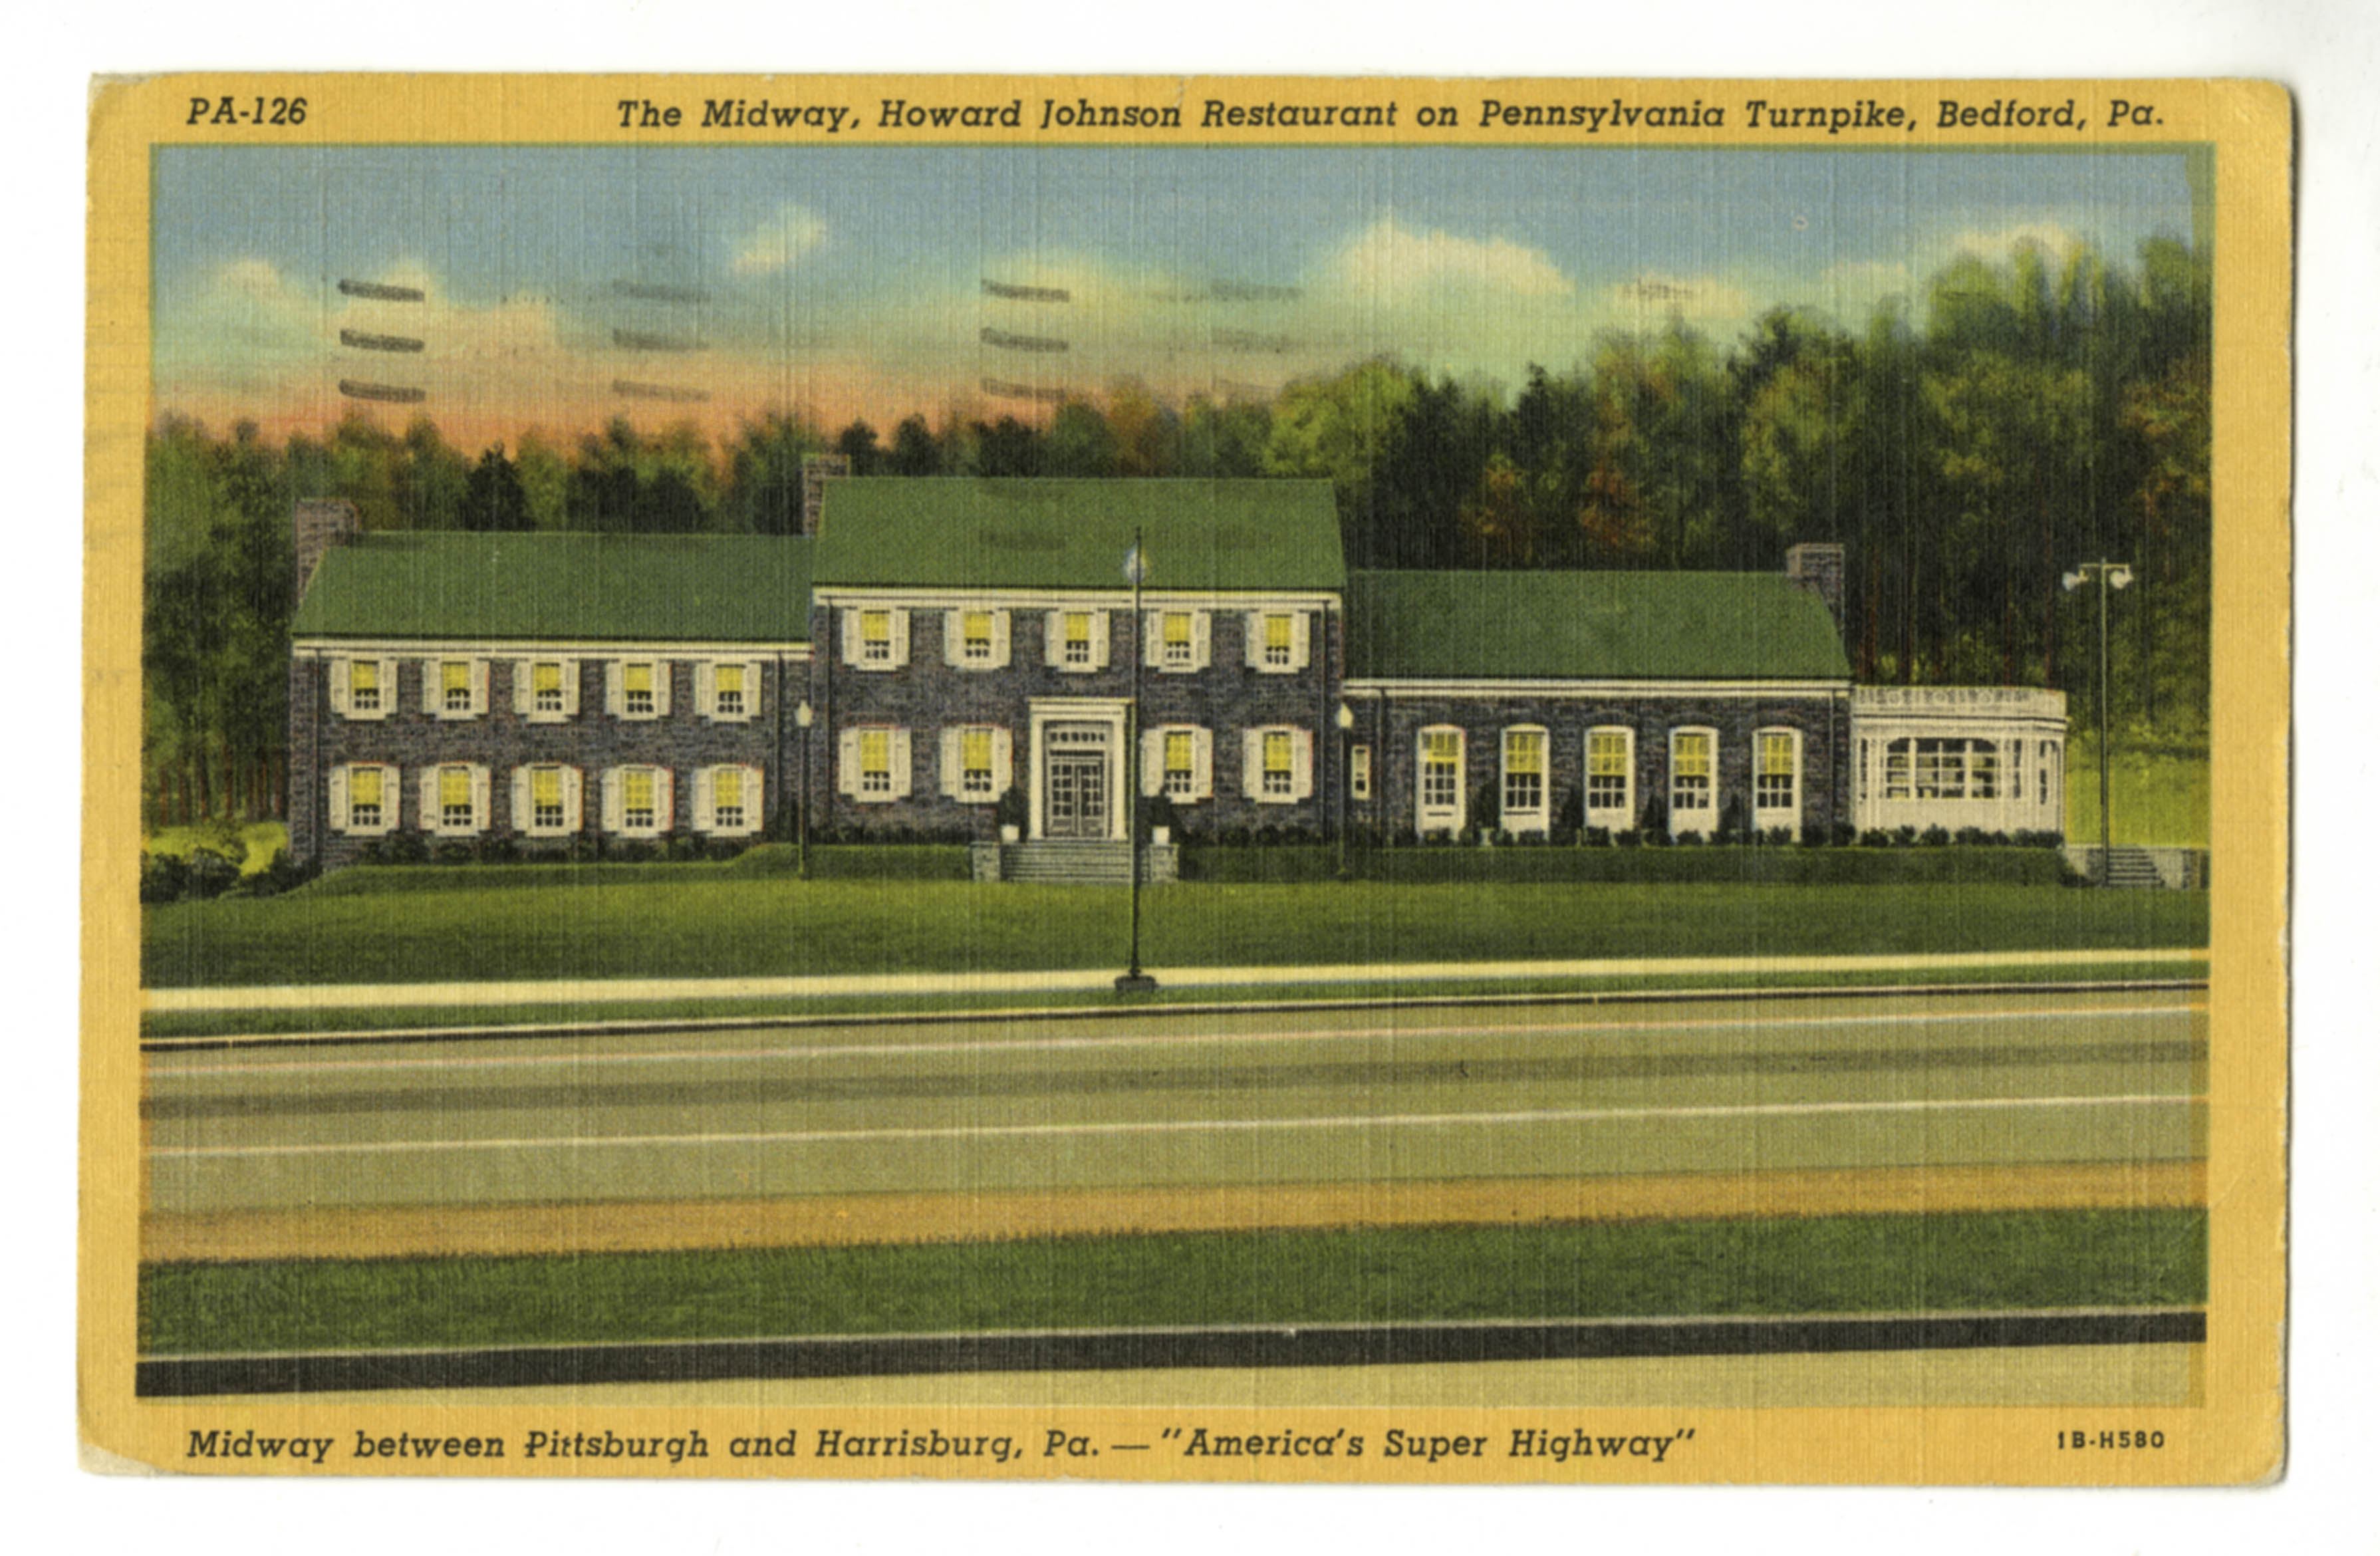 The South Midway plaza near Bedford, PA. Image credit: State Museum of Pennsylvania.